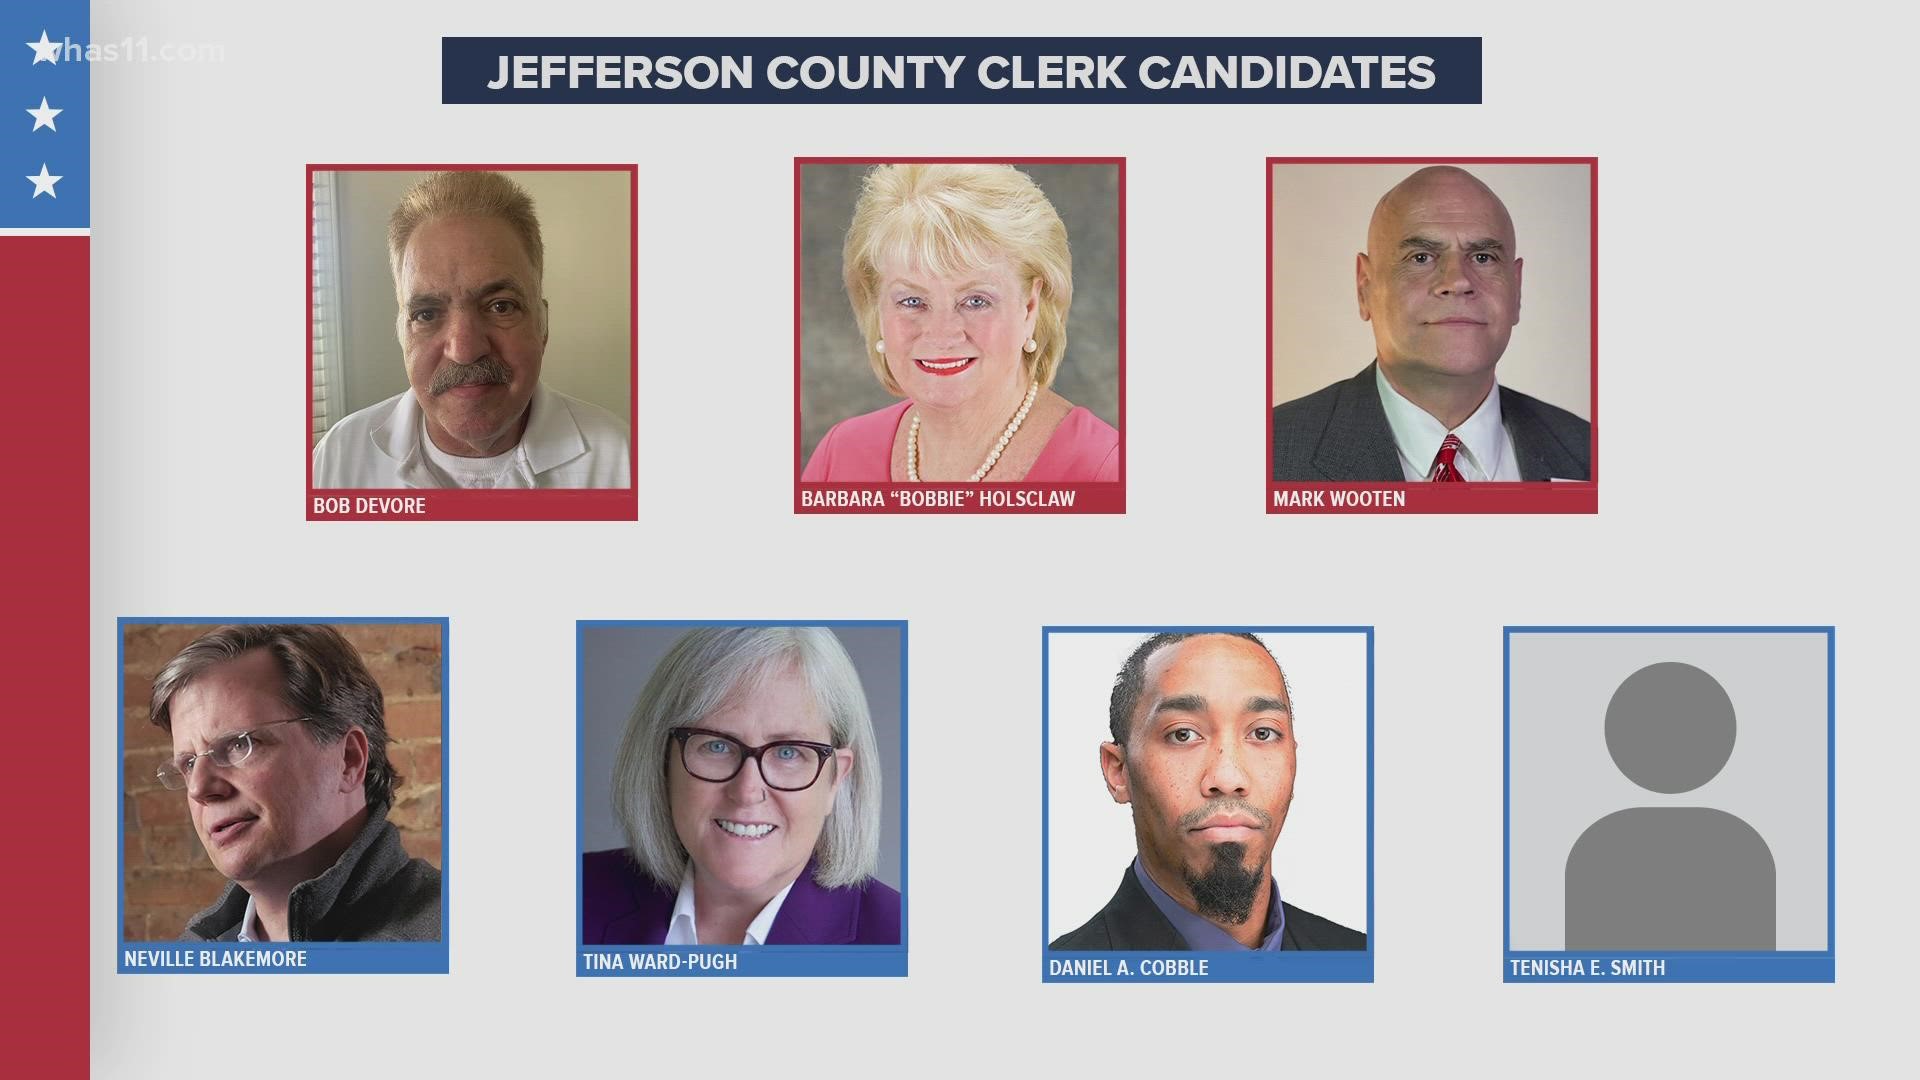 Several candidates are trying to unseat long-time Jefferson County Clerk Bobbie Holsclaw, who is running for a seventh term.